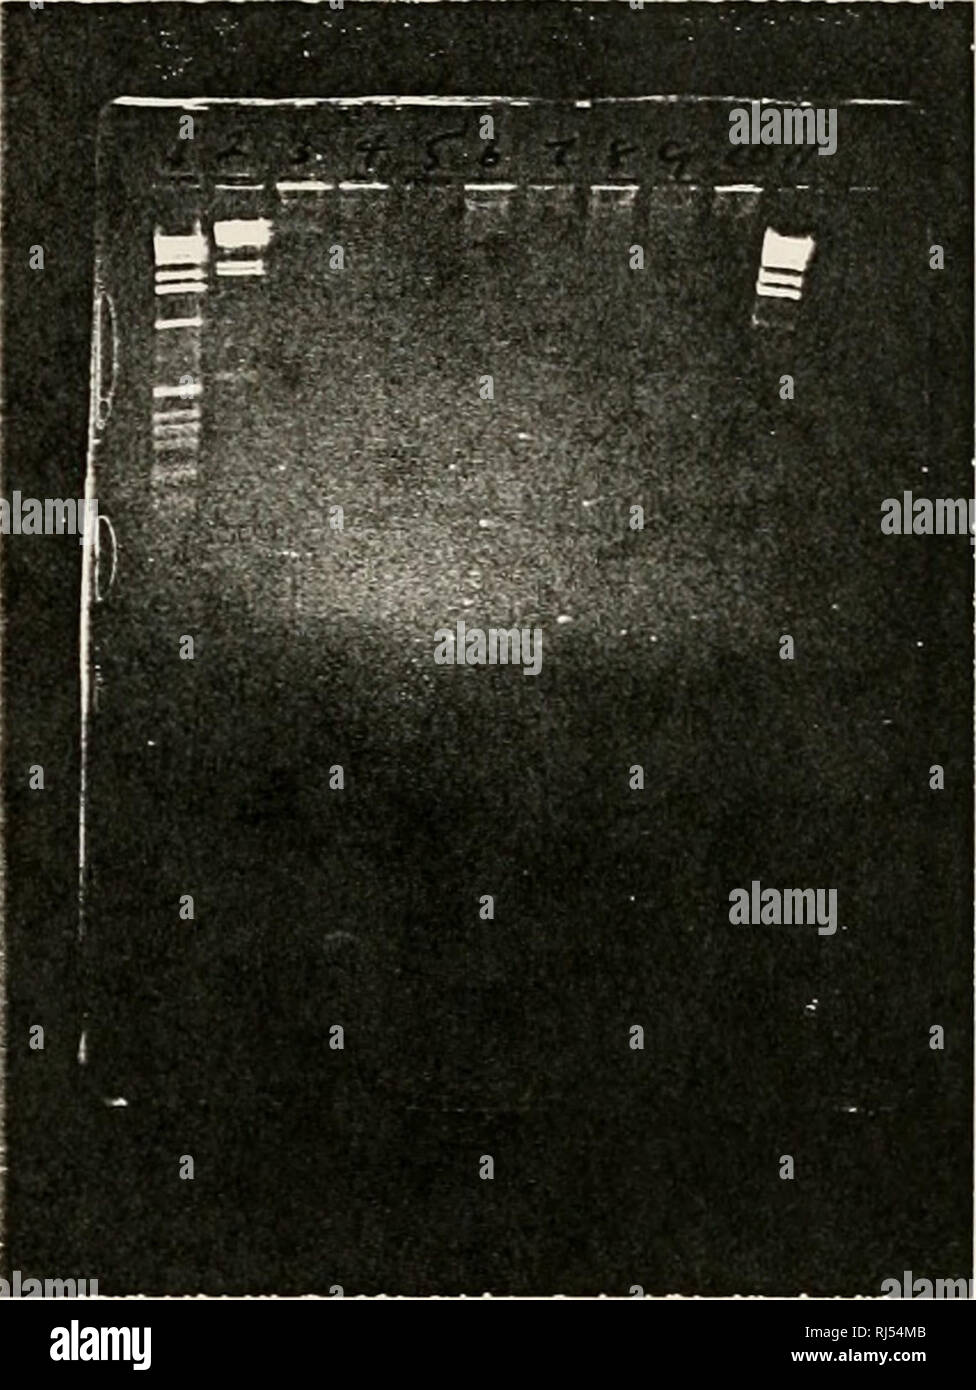 . Chromosome assignment of human genes. Human Genome Project; Sweet Briar College; Human gene mapping; Human chromosomes. Lane Fig. 16 - Chromosomal assignment of ASGR2-1 ( 146bp) with further decreased stringency bv increasing the concentration ot Mg&quot;*&quot;&quot;^ to 1.75mM. No bands detected. 1 and 1! = 1 Kb ladder. Lane 2 = lambda Hin D III DN.A. Lane 3 = chromosome 17. Lane 4 = chromosome 16. Lane 5 = chromosome 15. Lane 6 = chromosome 14. Lane 7 = chromosome 13. Lane 8 = chromosome 12. Lane '^^ = .Mappmg panel human DNA. Lane 10 = Mapping panel Chinese hamster D.NA.. 48. Please note Stock Photo